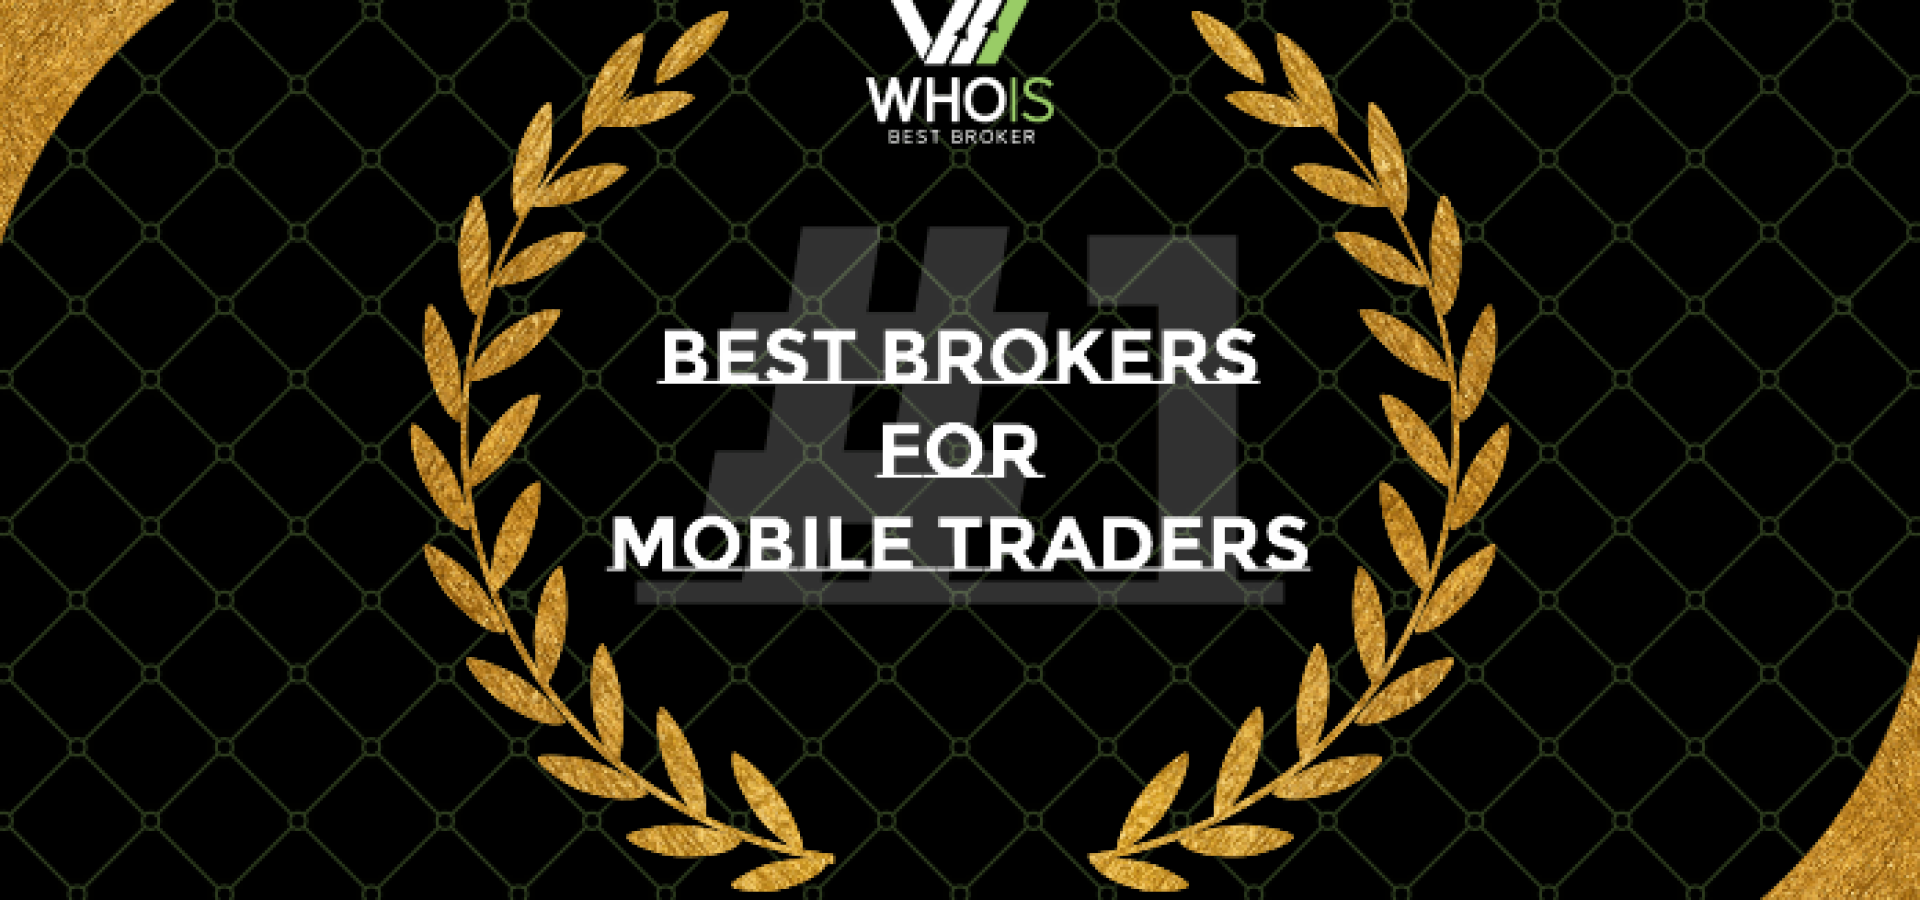 Best Brokers for Mobile Traders